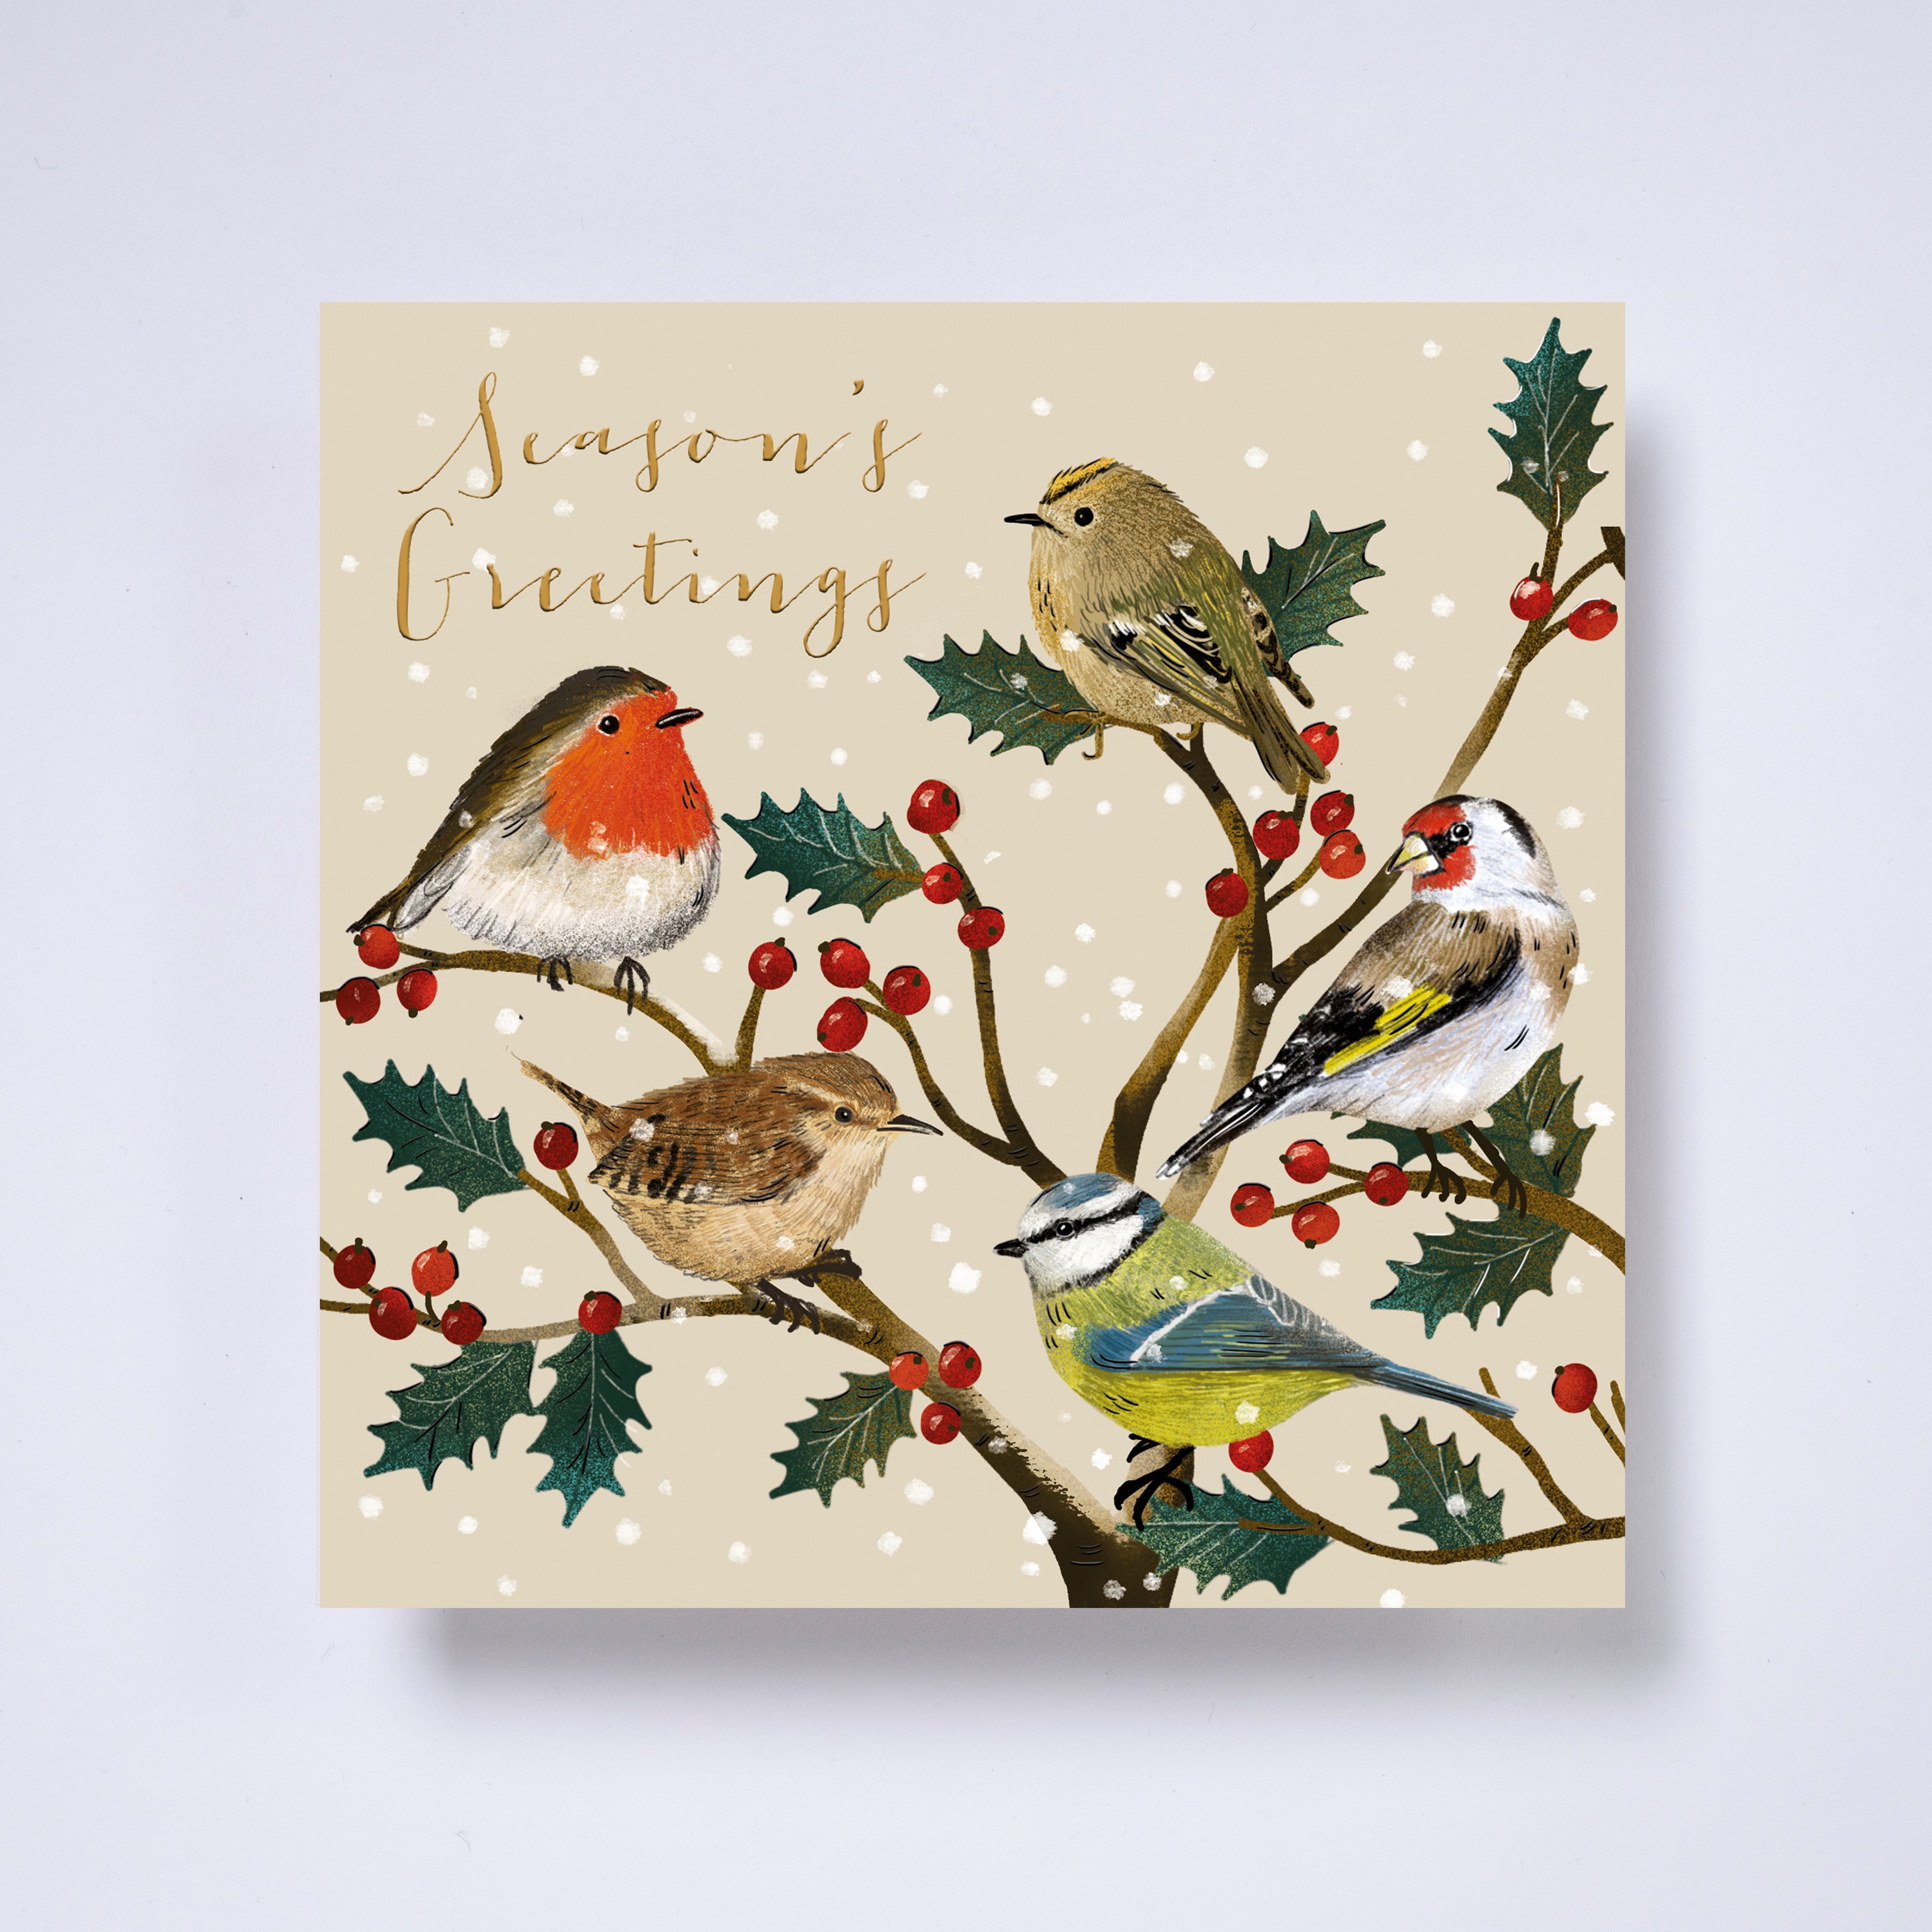 Birds in branches - pack of 10 charity Christmas cards with envelopes